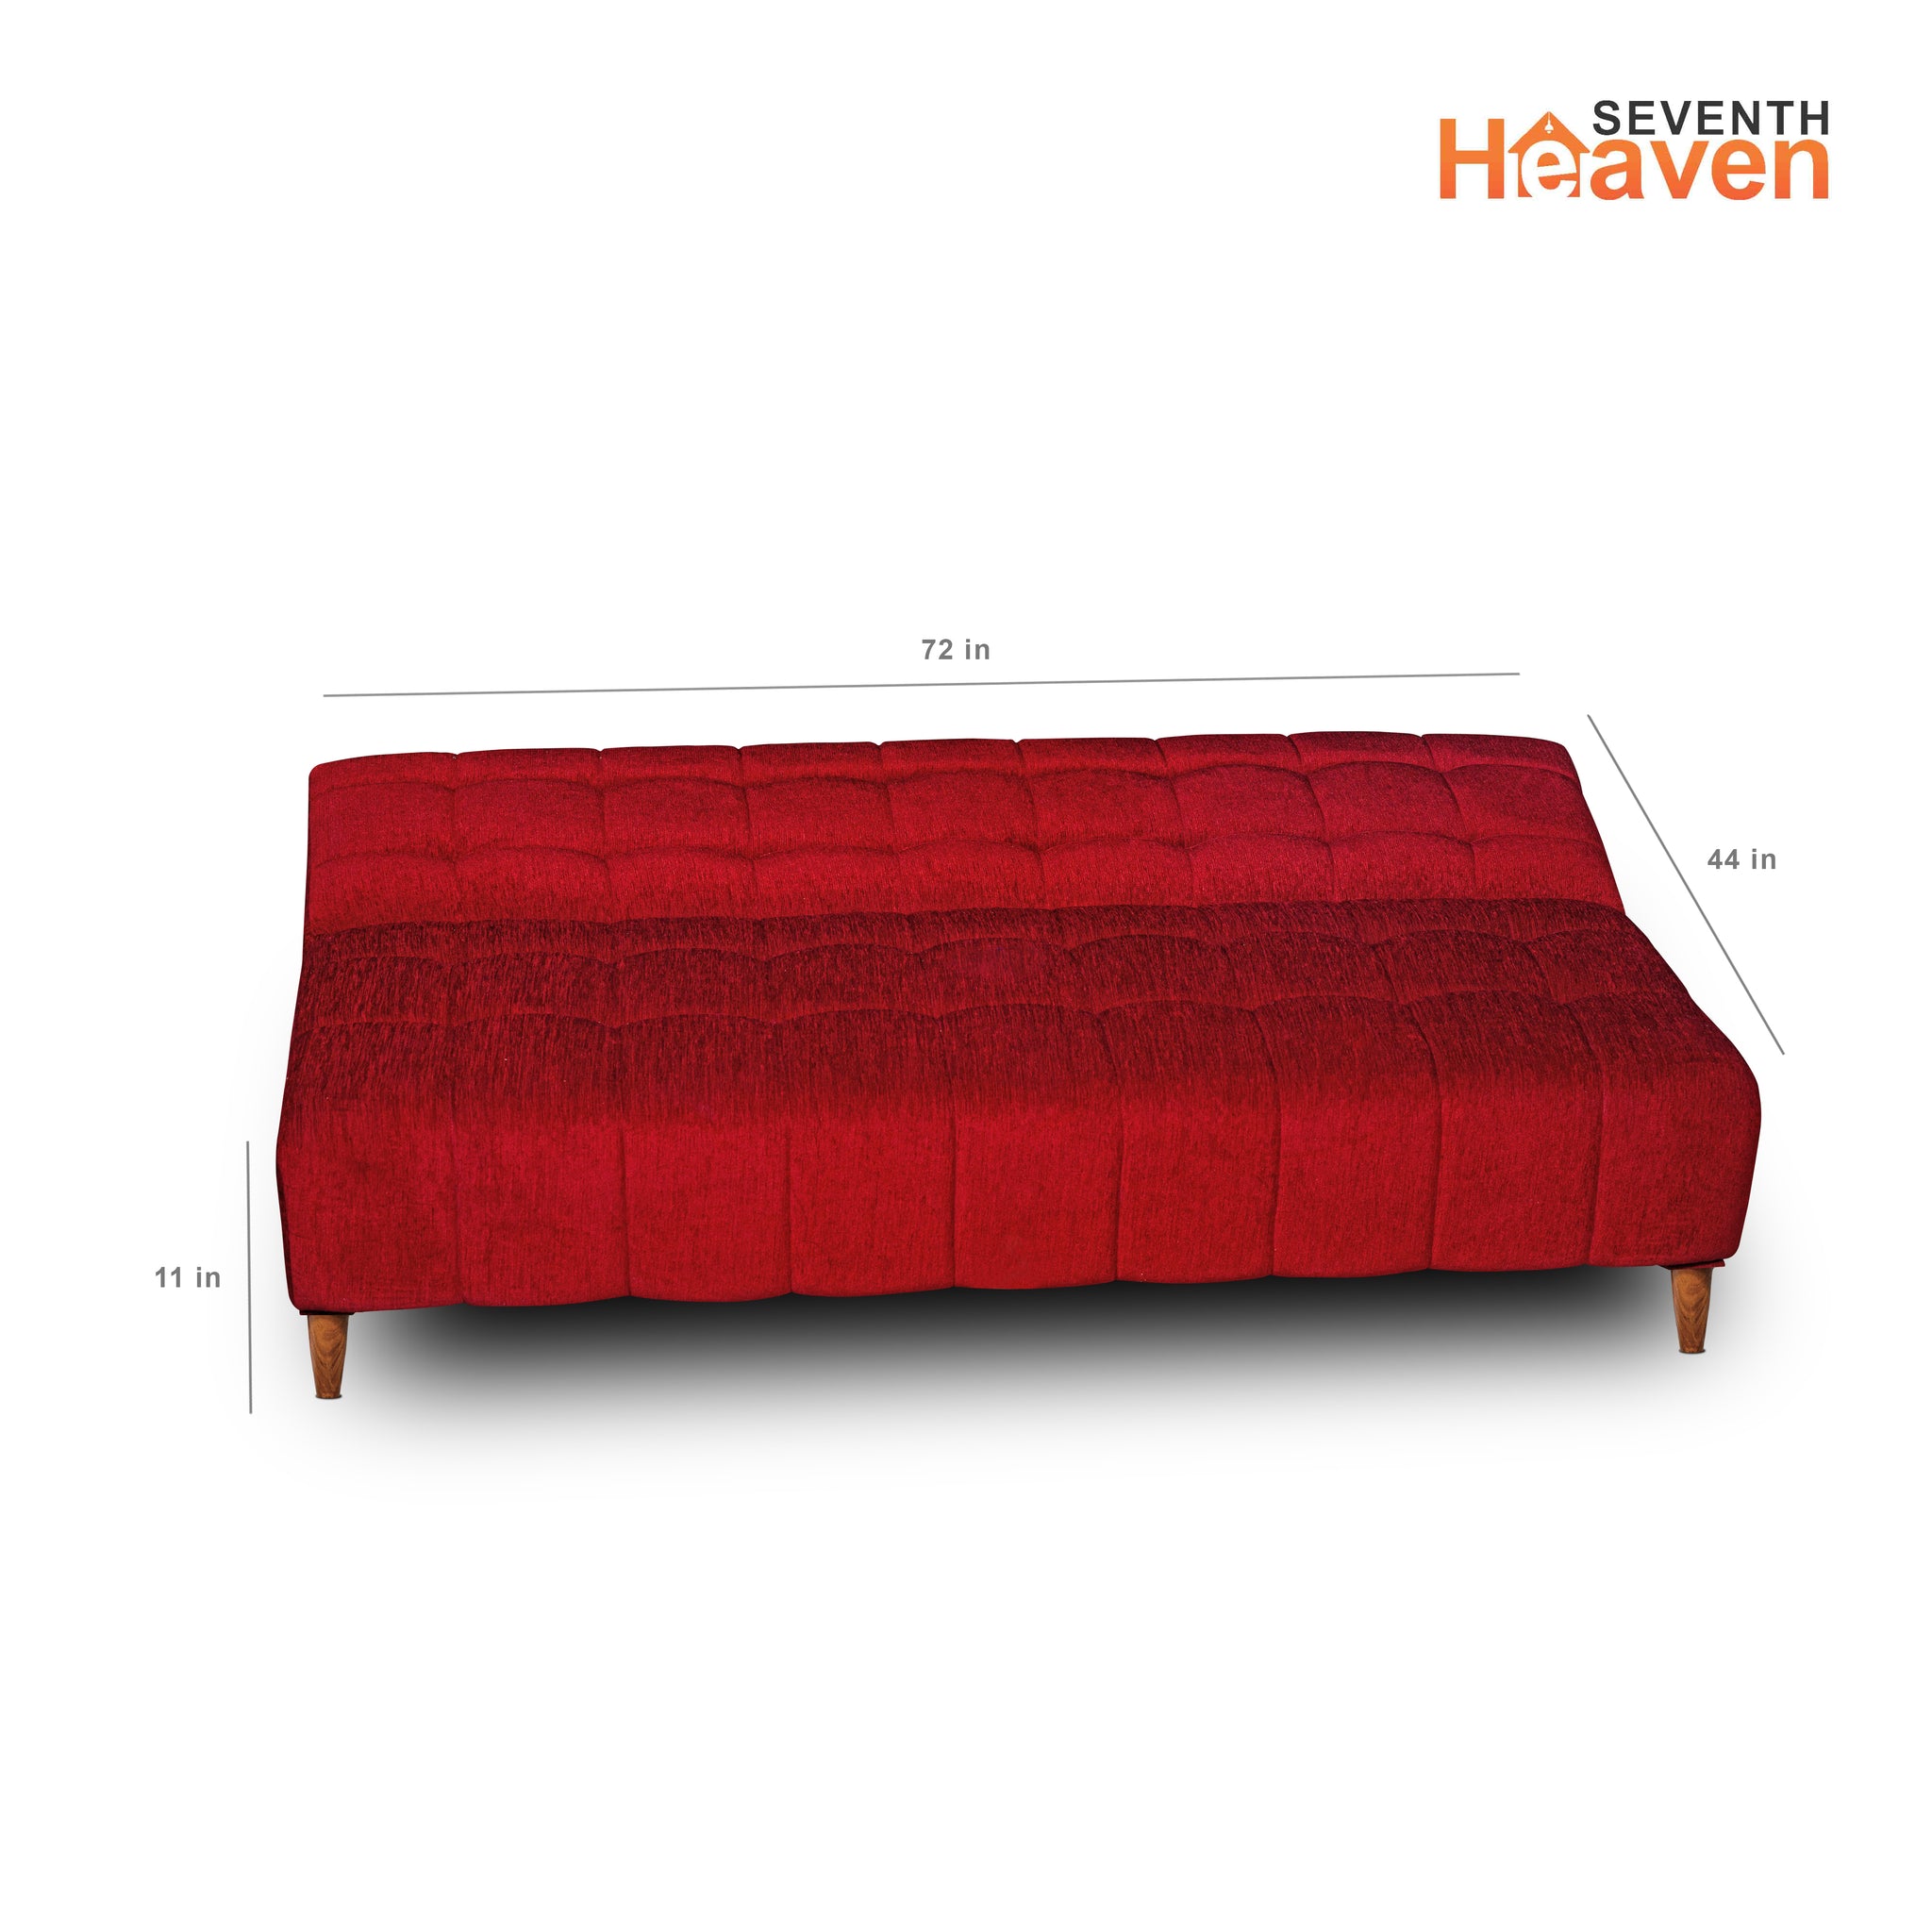 Seventh Heaven Lisbon 4 Seater Wooden Sofa Cum Bed with Armrest. Modern & Elegant Smart Furniture Range for luxurious homes, living rooms and offices. Use as a sofa, lounger or bed with removable armrest. Perfect for guests. Molphino fabric with sheesham polished wooden legs. Maroon colour.